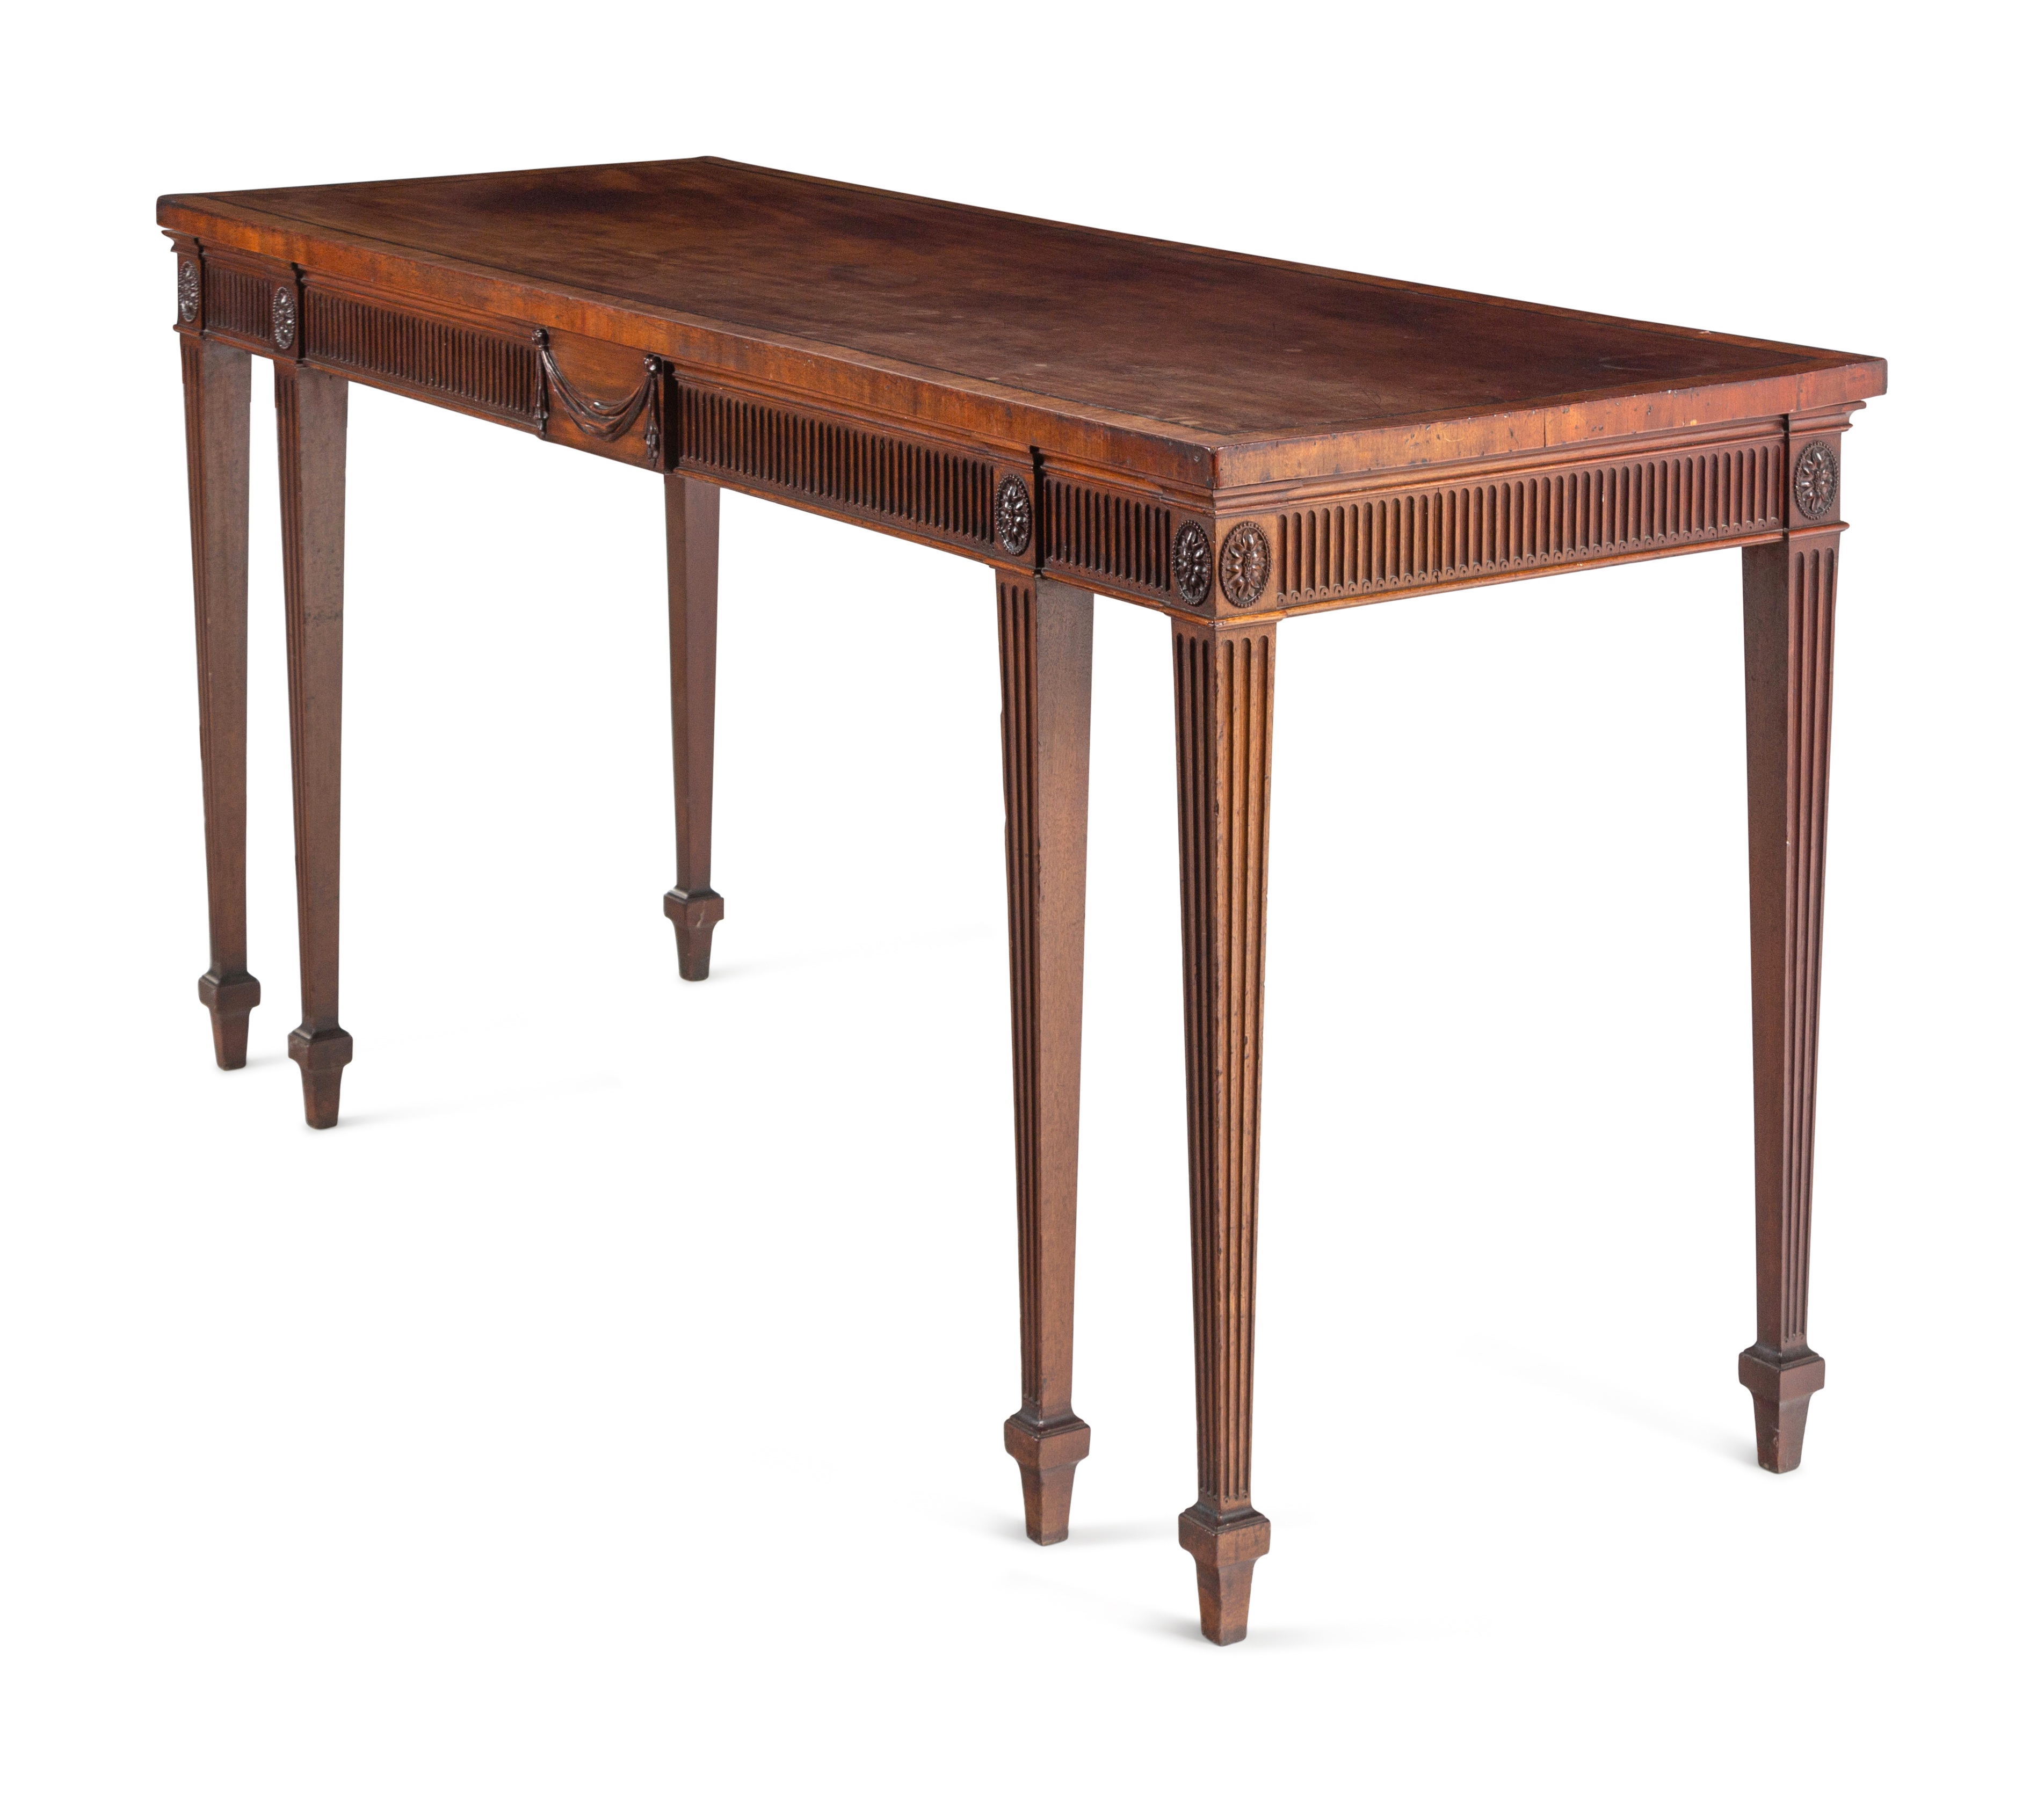 A George III Mahogany and Ebony-Inlaid Serving Table in the Manner of Thomas Chippendale - Image 2 of 8